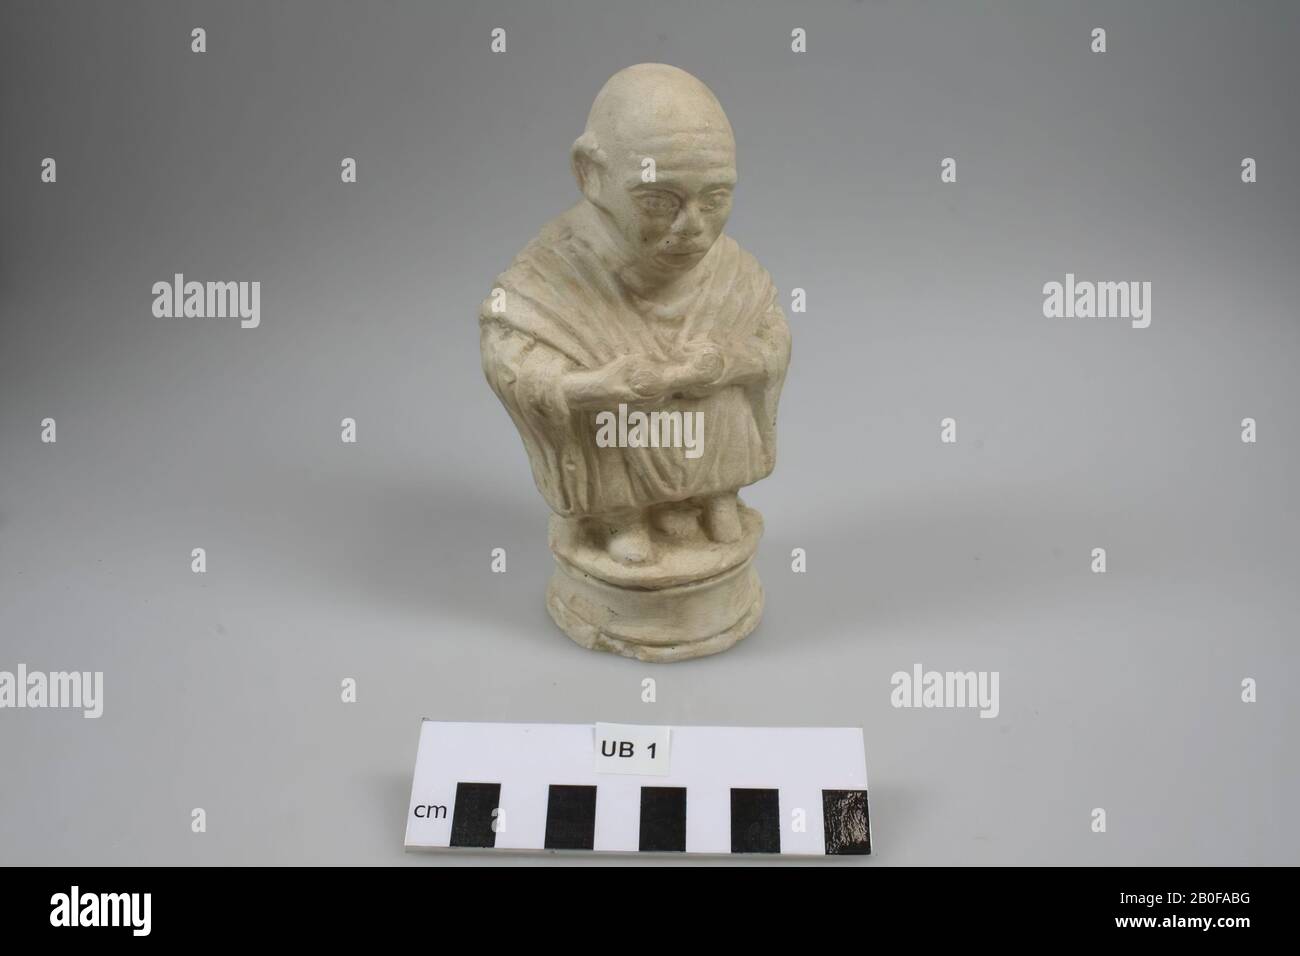 Casting of a terracotta statue of a bald-headed, standing dwarf wearing a Gallic coat and a cucullus with the hood backwards. He has a scroll in his hands., Casting, dwarf, plaster, 6,7 x 8,3 x 15,2 cm, roman, Netherlands, Utrecht, Bunnik, Fighting Stock Photo